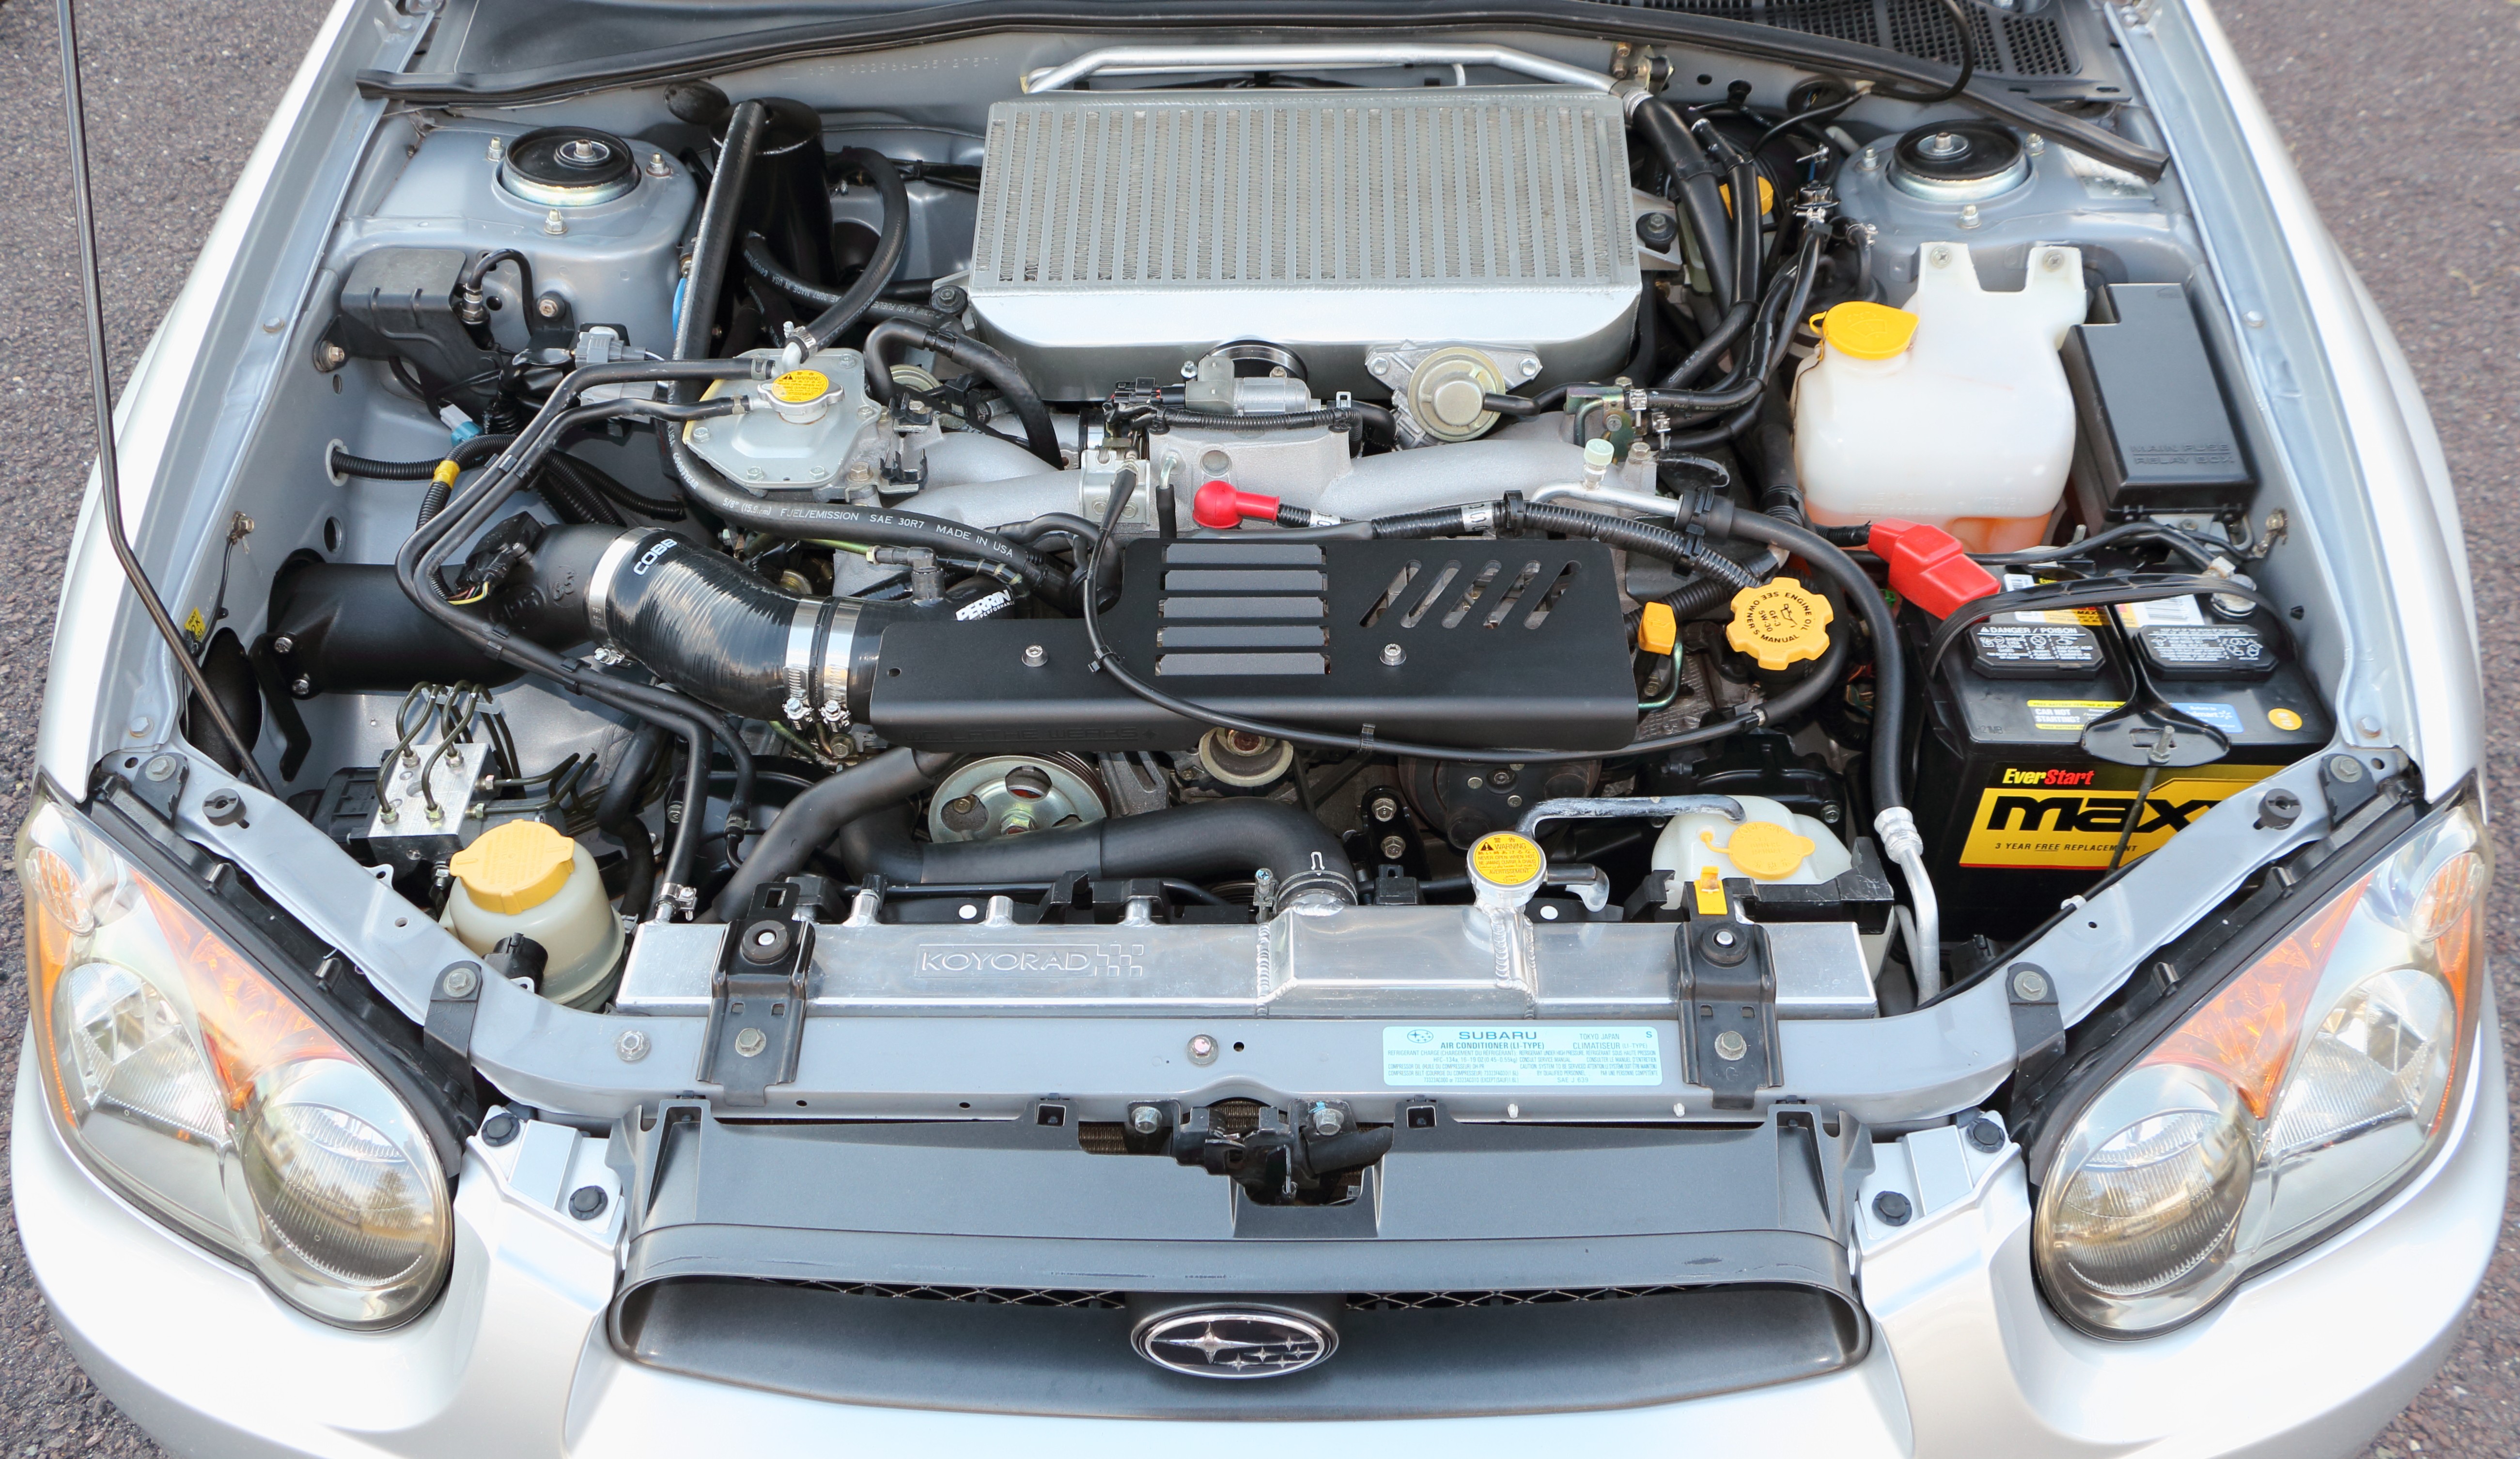 Wrx Engine Bay Diagram How to Safely Clean An Engine Bay Of Wrx Engine Bay Diagram